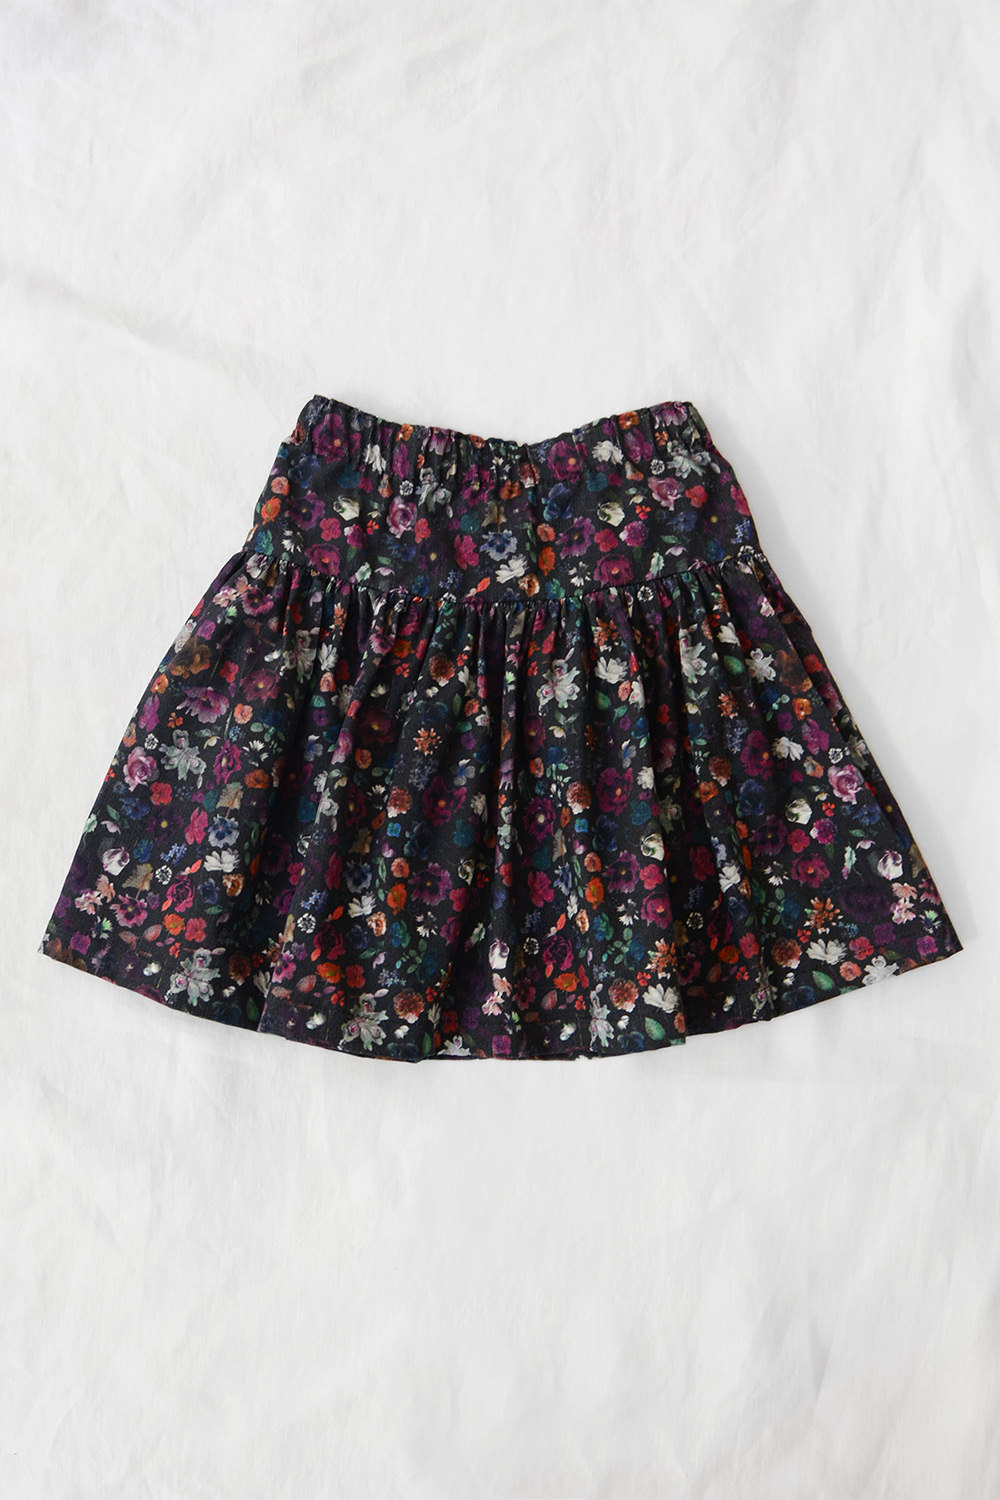 Kid's Corduroy Skirt Floral Print Top Picture